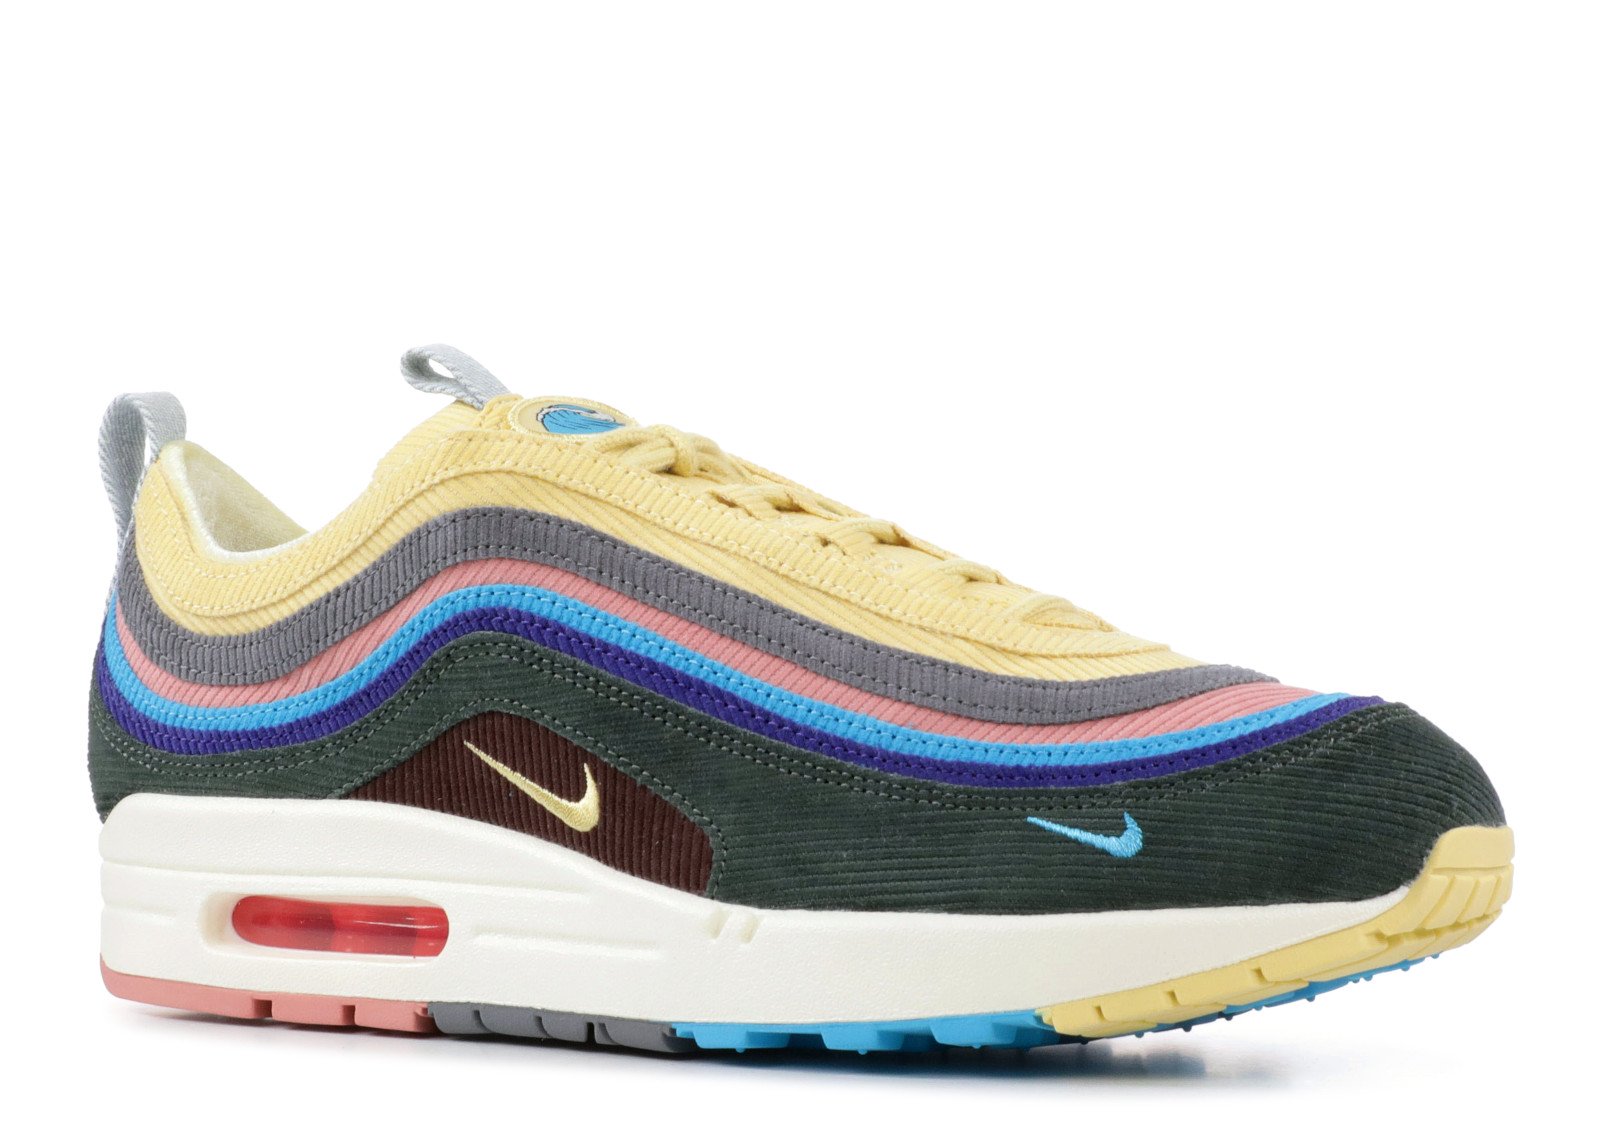 AIR MAX 1/97 VF SW "SEAN WOTHERSPOON"